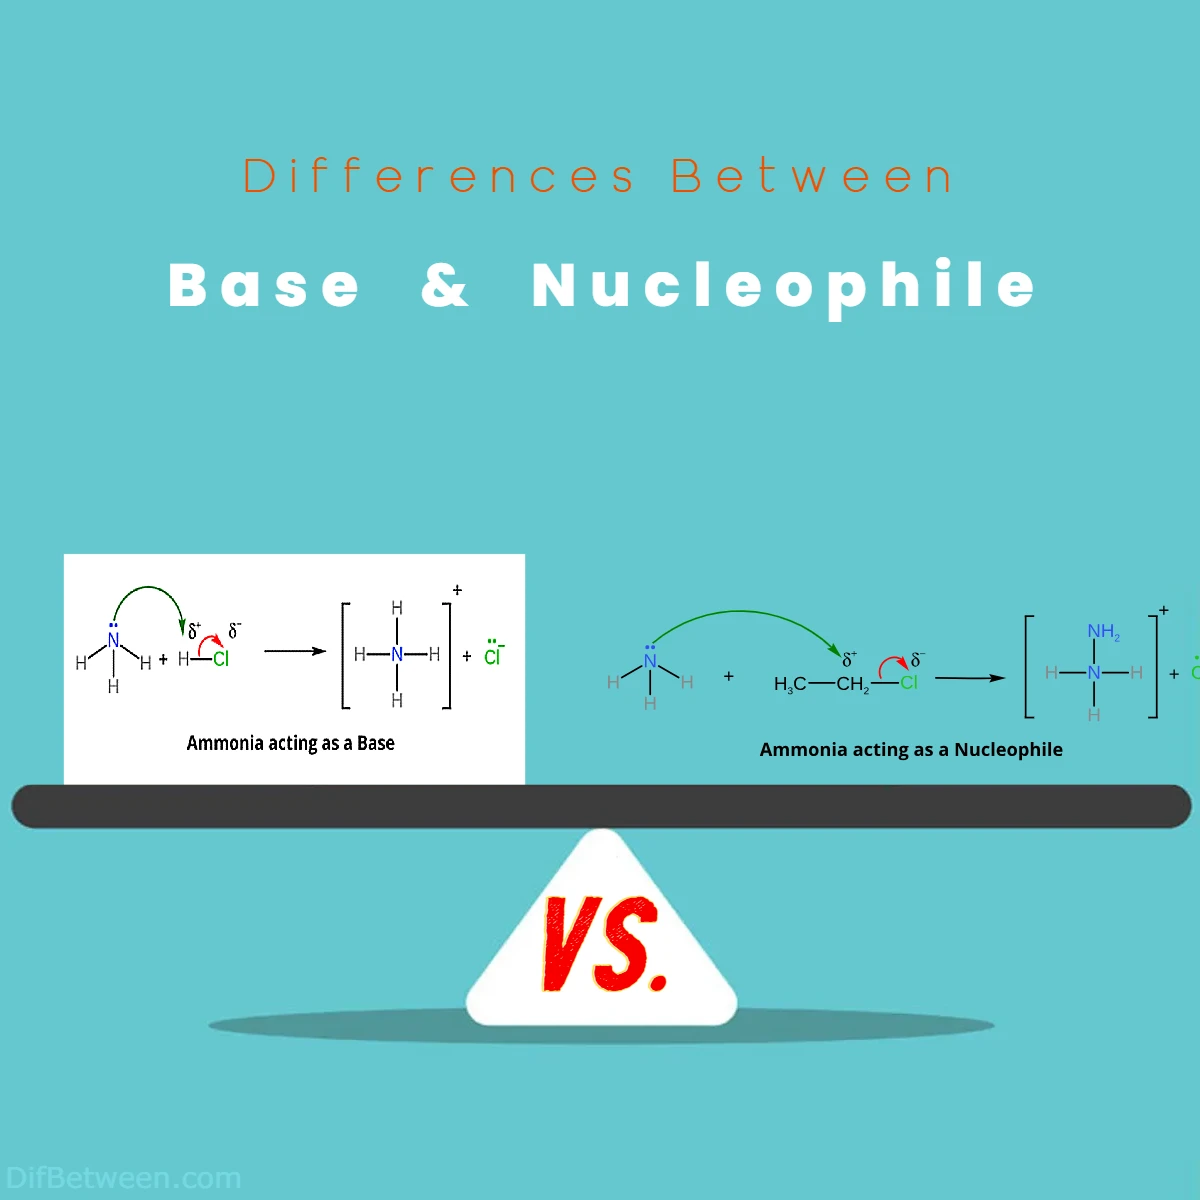 Differences Between Base vs Nucleophile